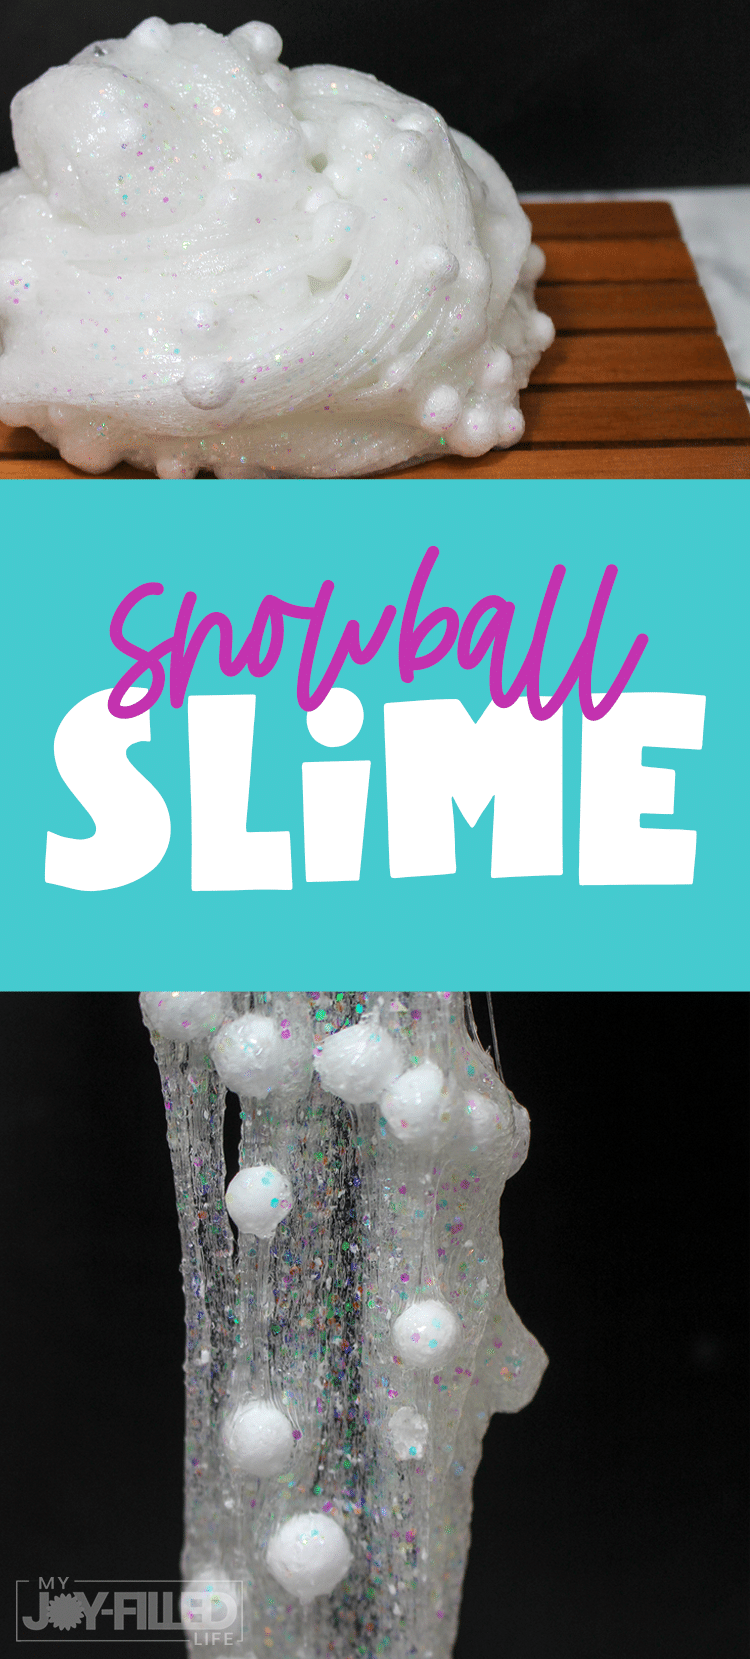 This snowball slime is the perfect indoor activity during the winter months. It is sure to keep kids occupied while being stuck inside due to cold weather! #slime #slimerecipe #snowballslime #sensoryplay